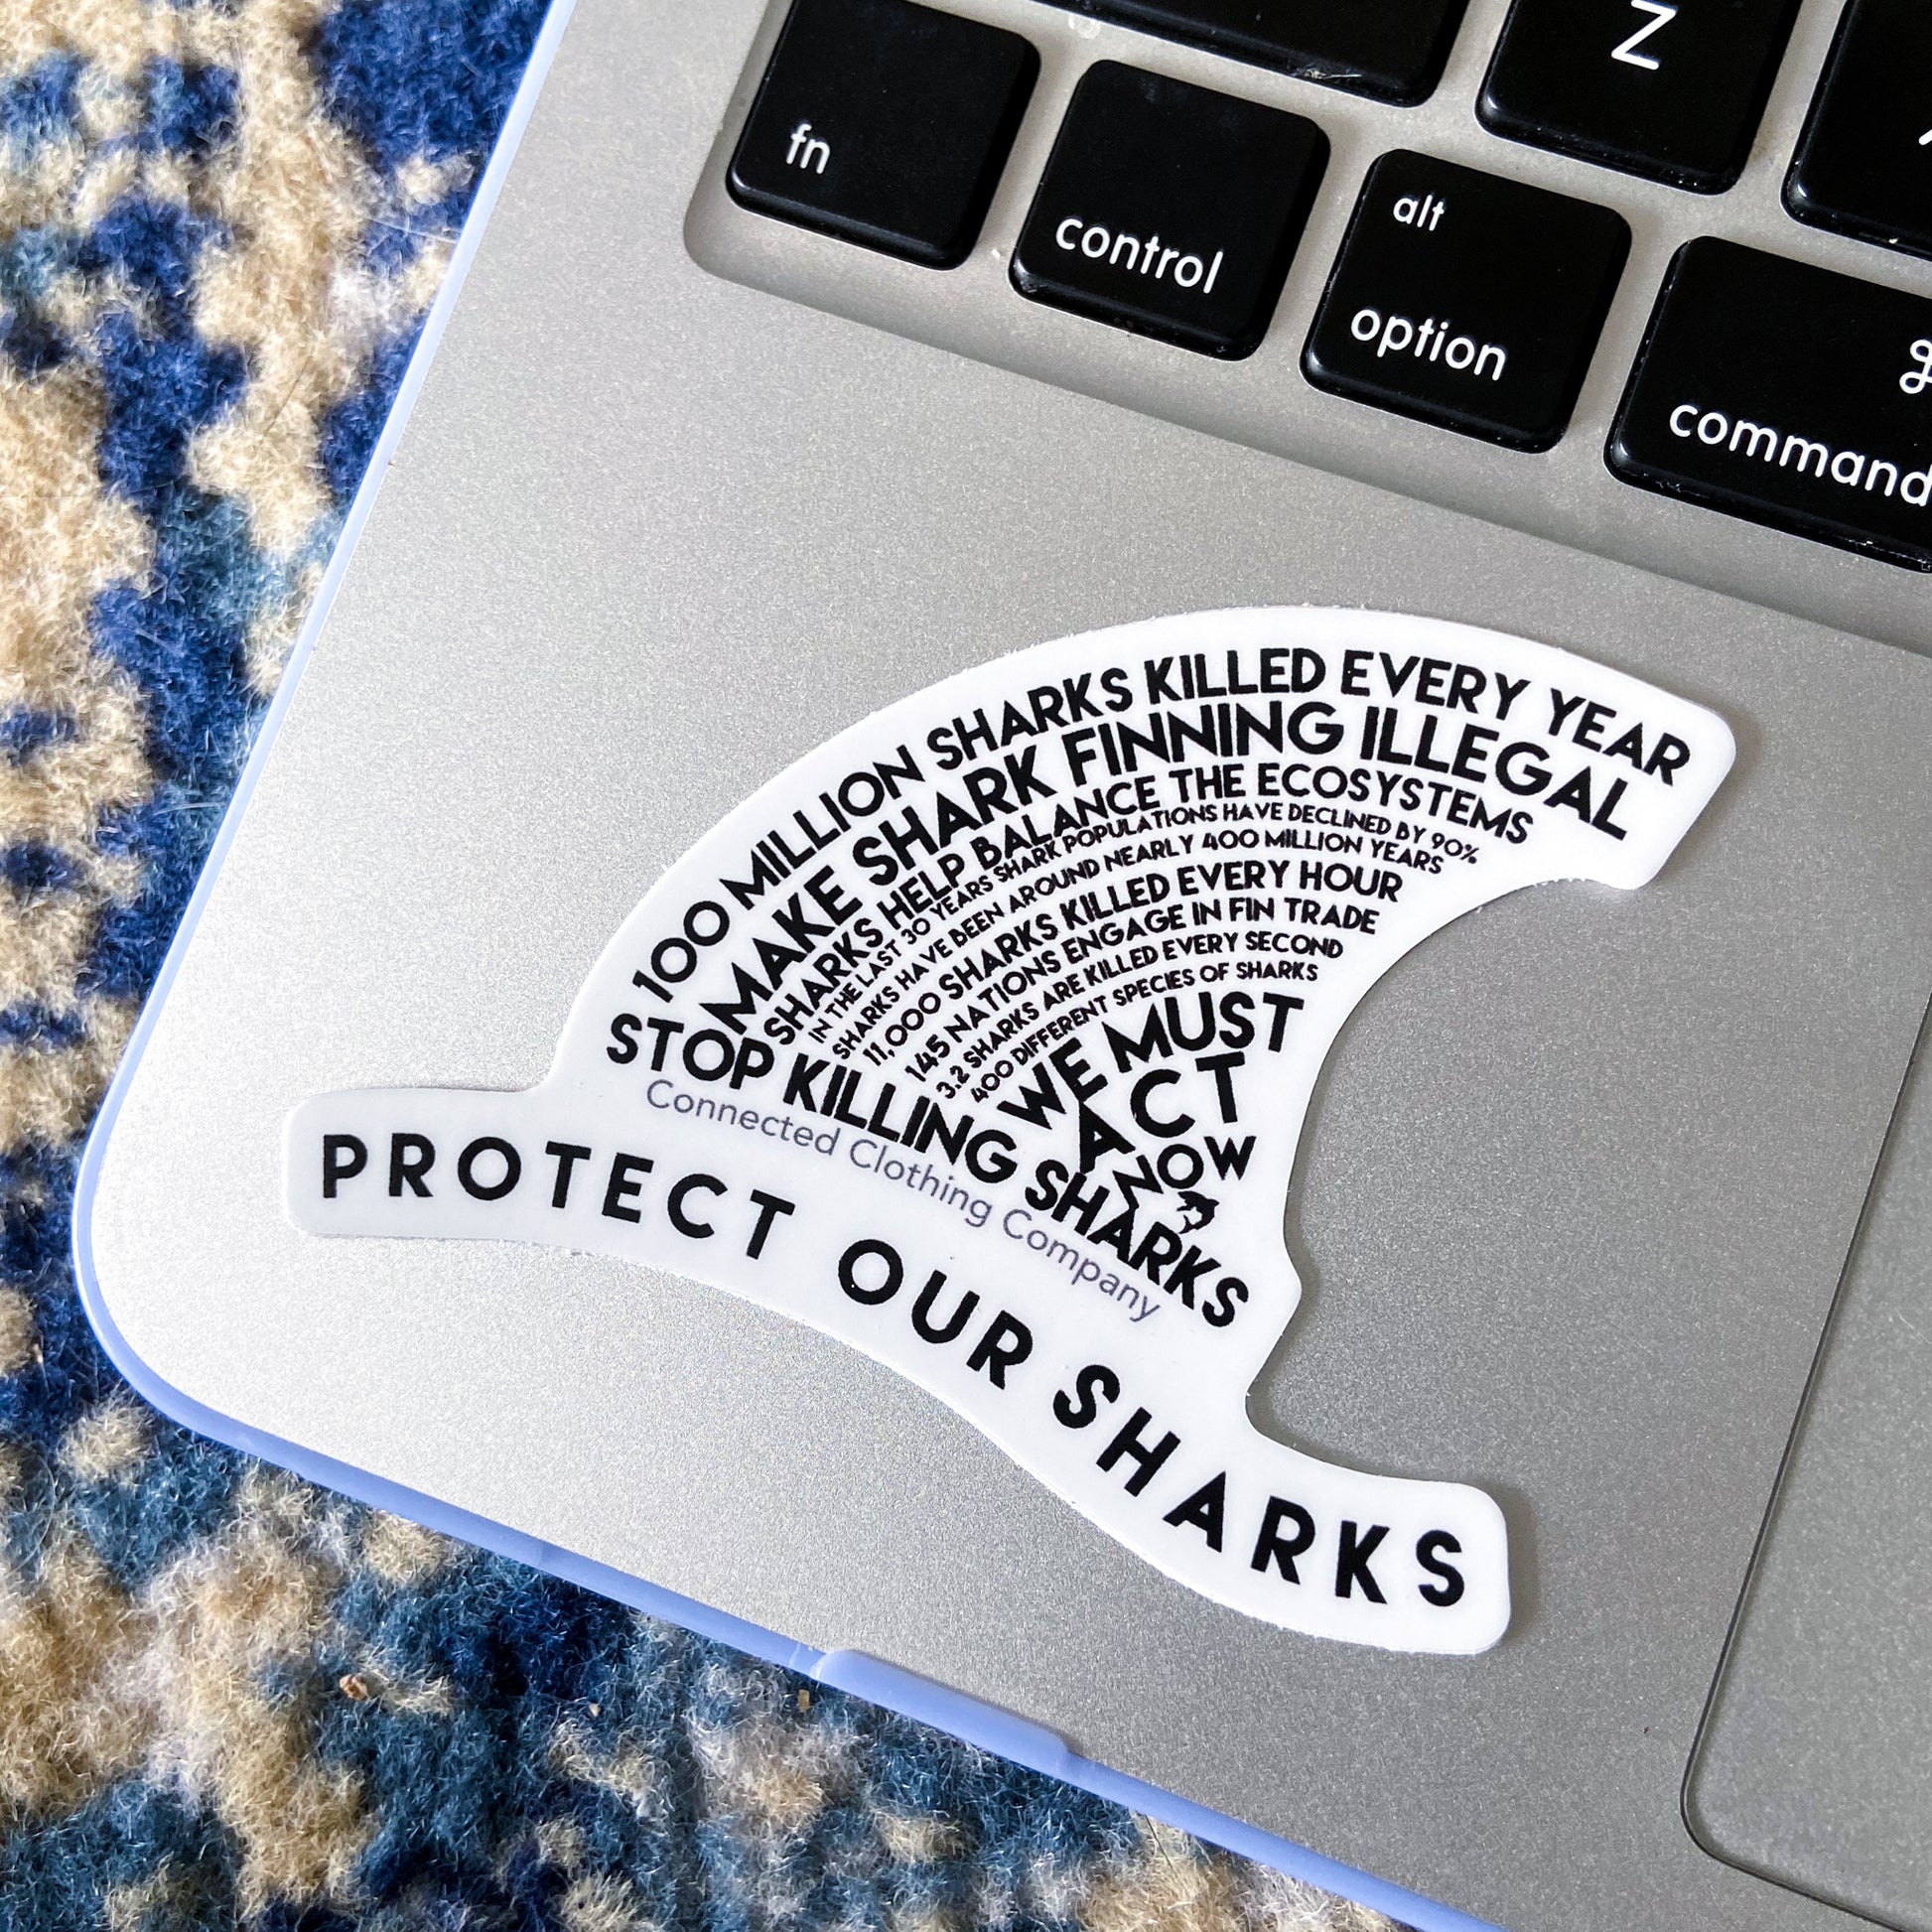 architectconstructor Protect Our Sharks Sticker on Macbook for size reference.